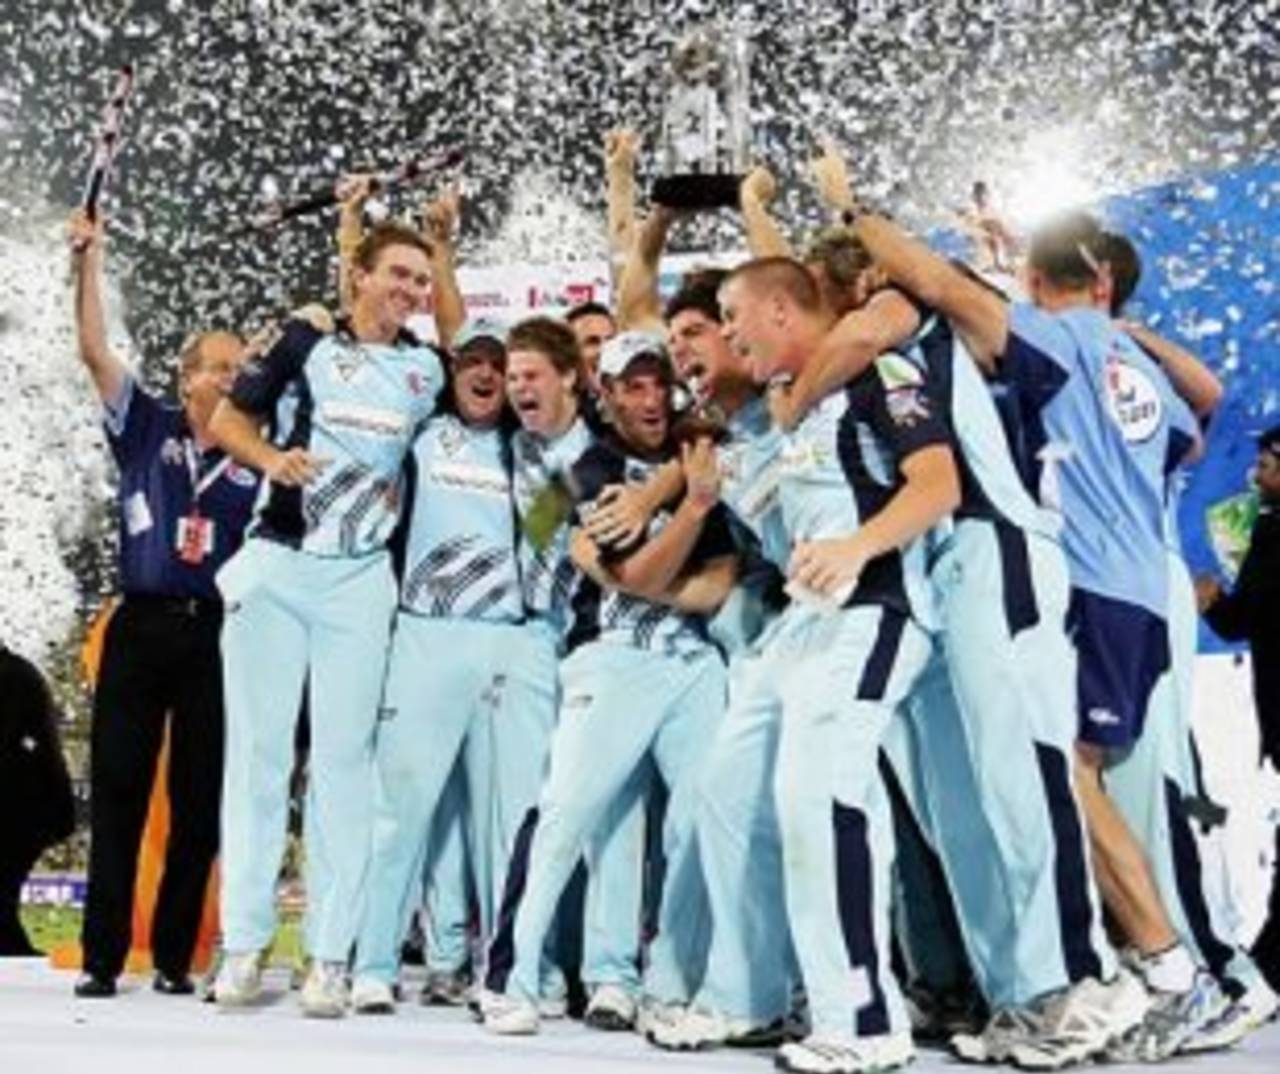 New South Wales won the inaugural Champions League T20 last year. This year's event will be closely watched for any signs of illicit gambling&nbsp;&nbsp;&bull;&nbsp;&nbsp;Global Cricket Ventures-BCCI